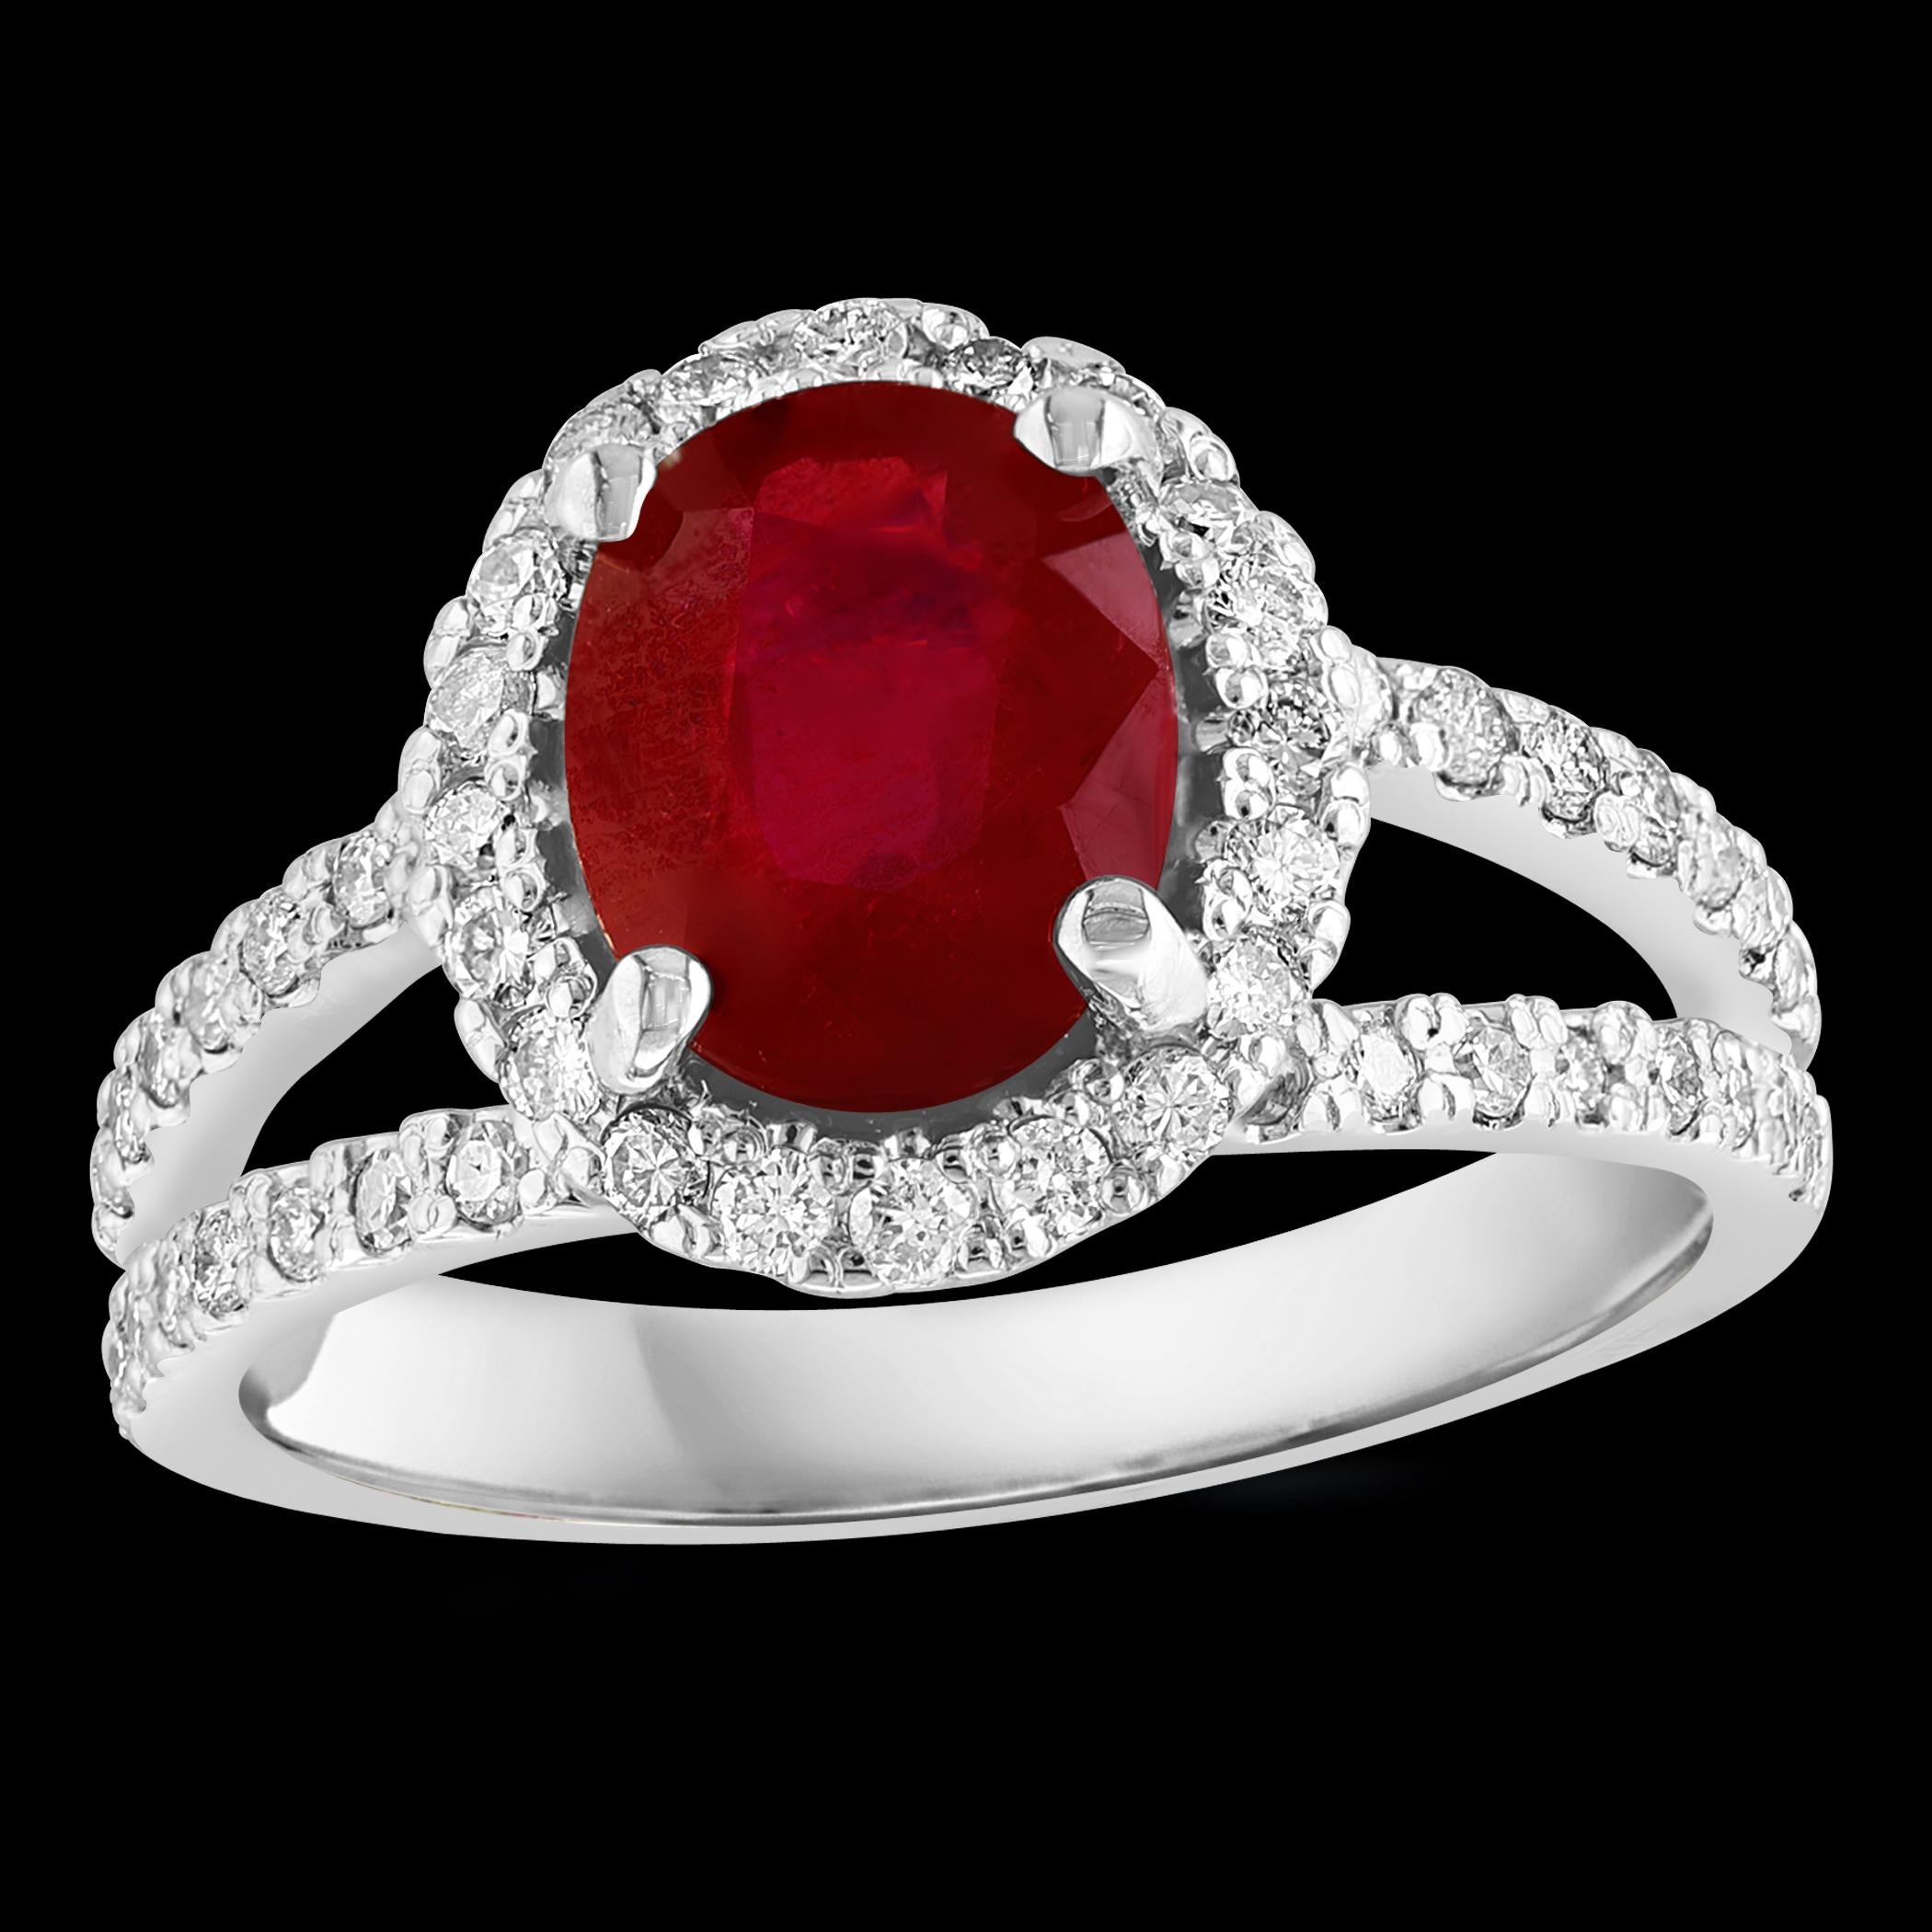 2.5 Carat Oval Treated Ruby & 2 ct Diamond Ring 14 Karat White Gold Size 7 For Sale 6